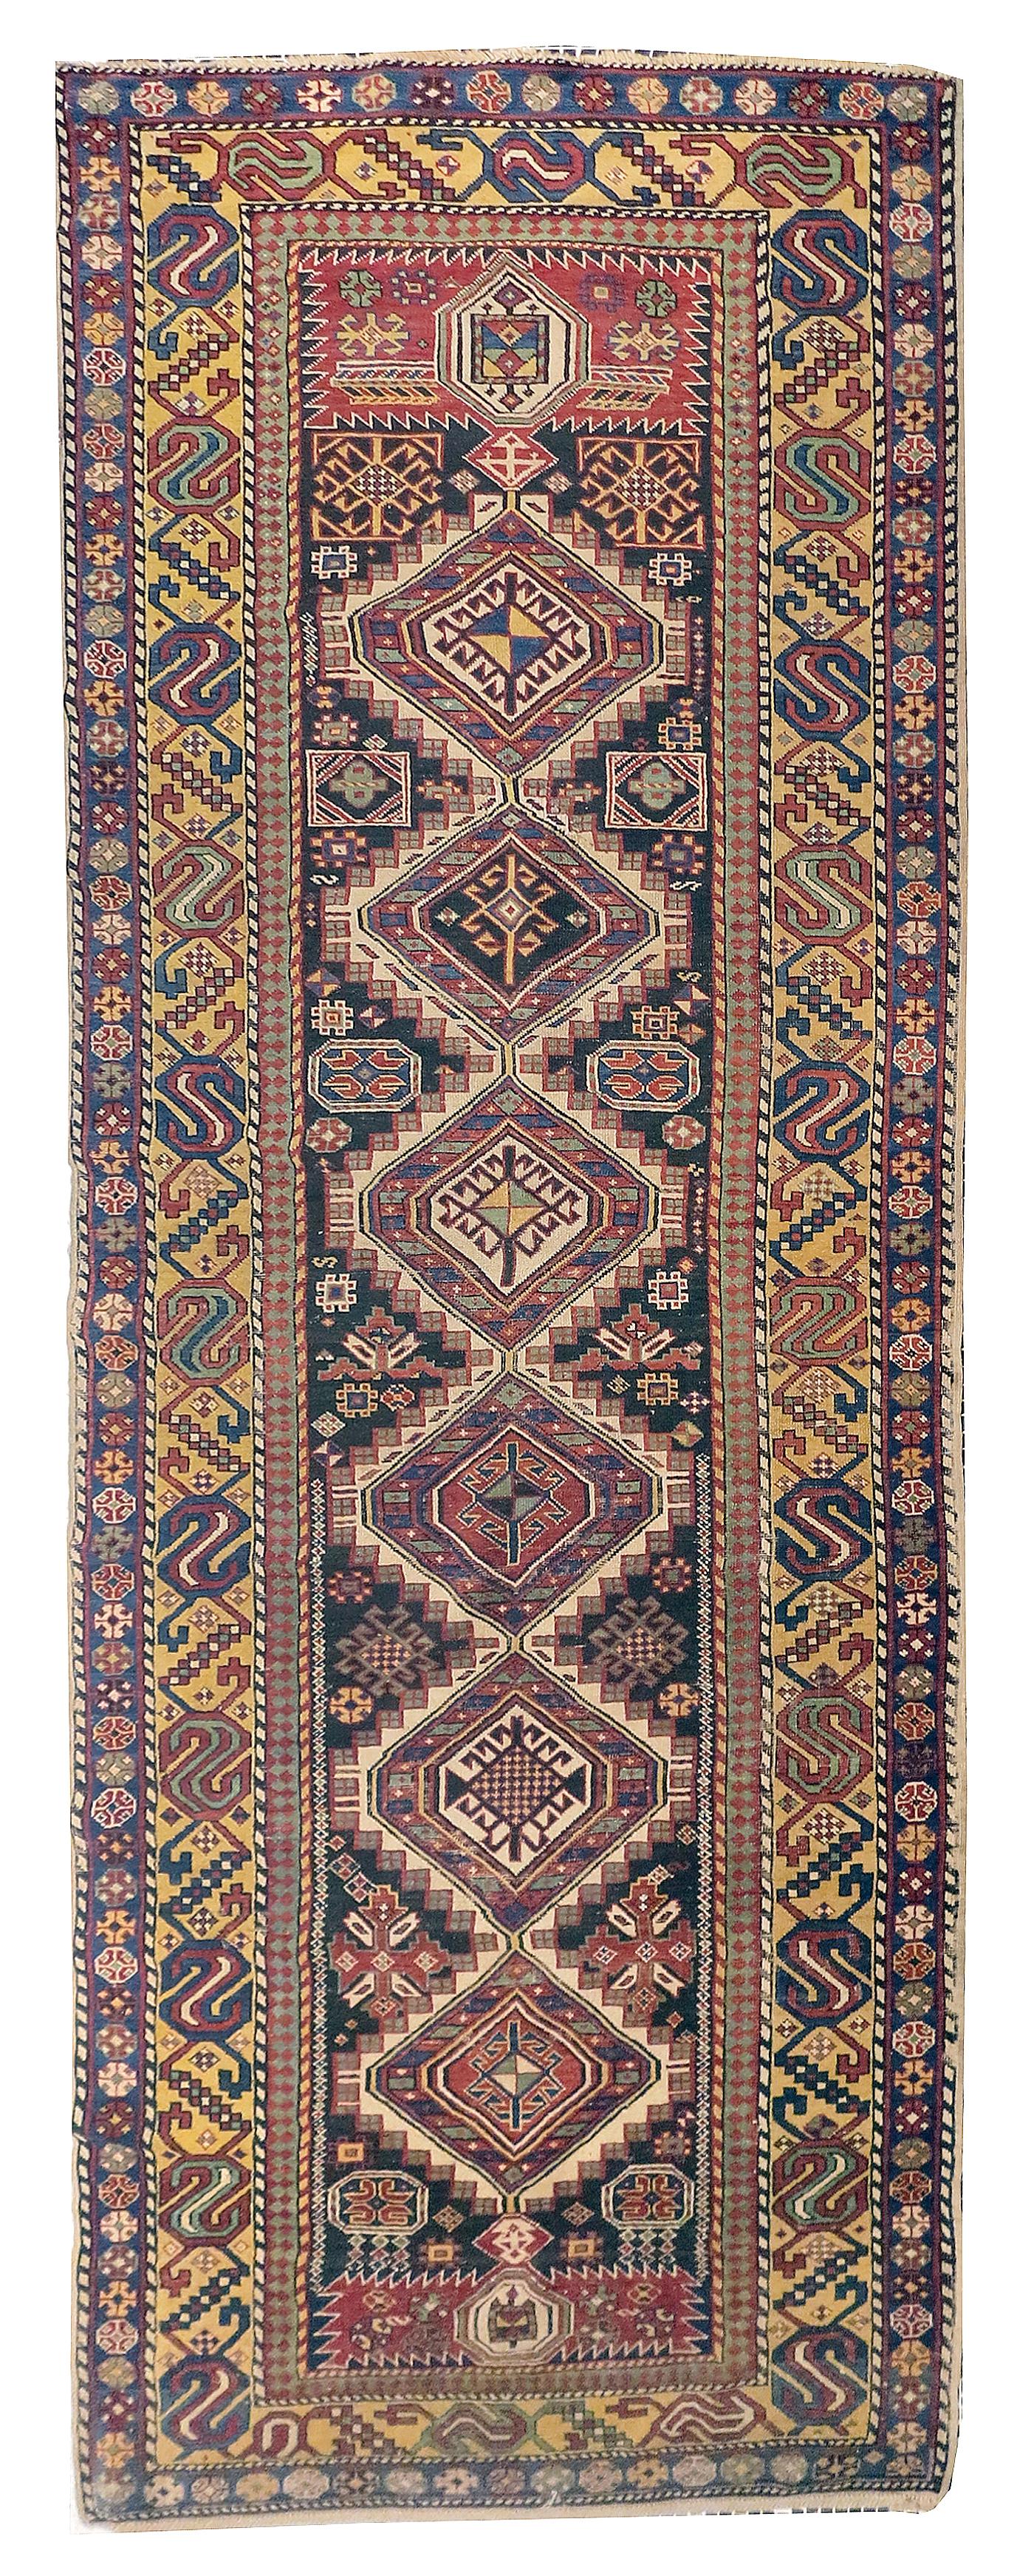 Other Fine Antique Caucasian Shriven Runner Rug, Hand Knotted, circa 1890